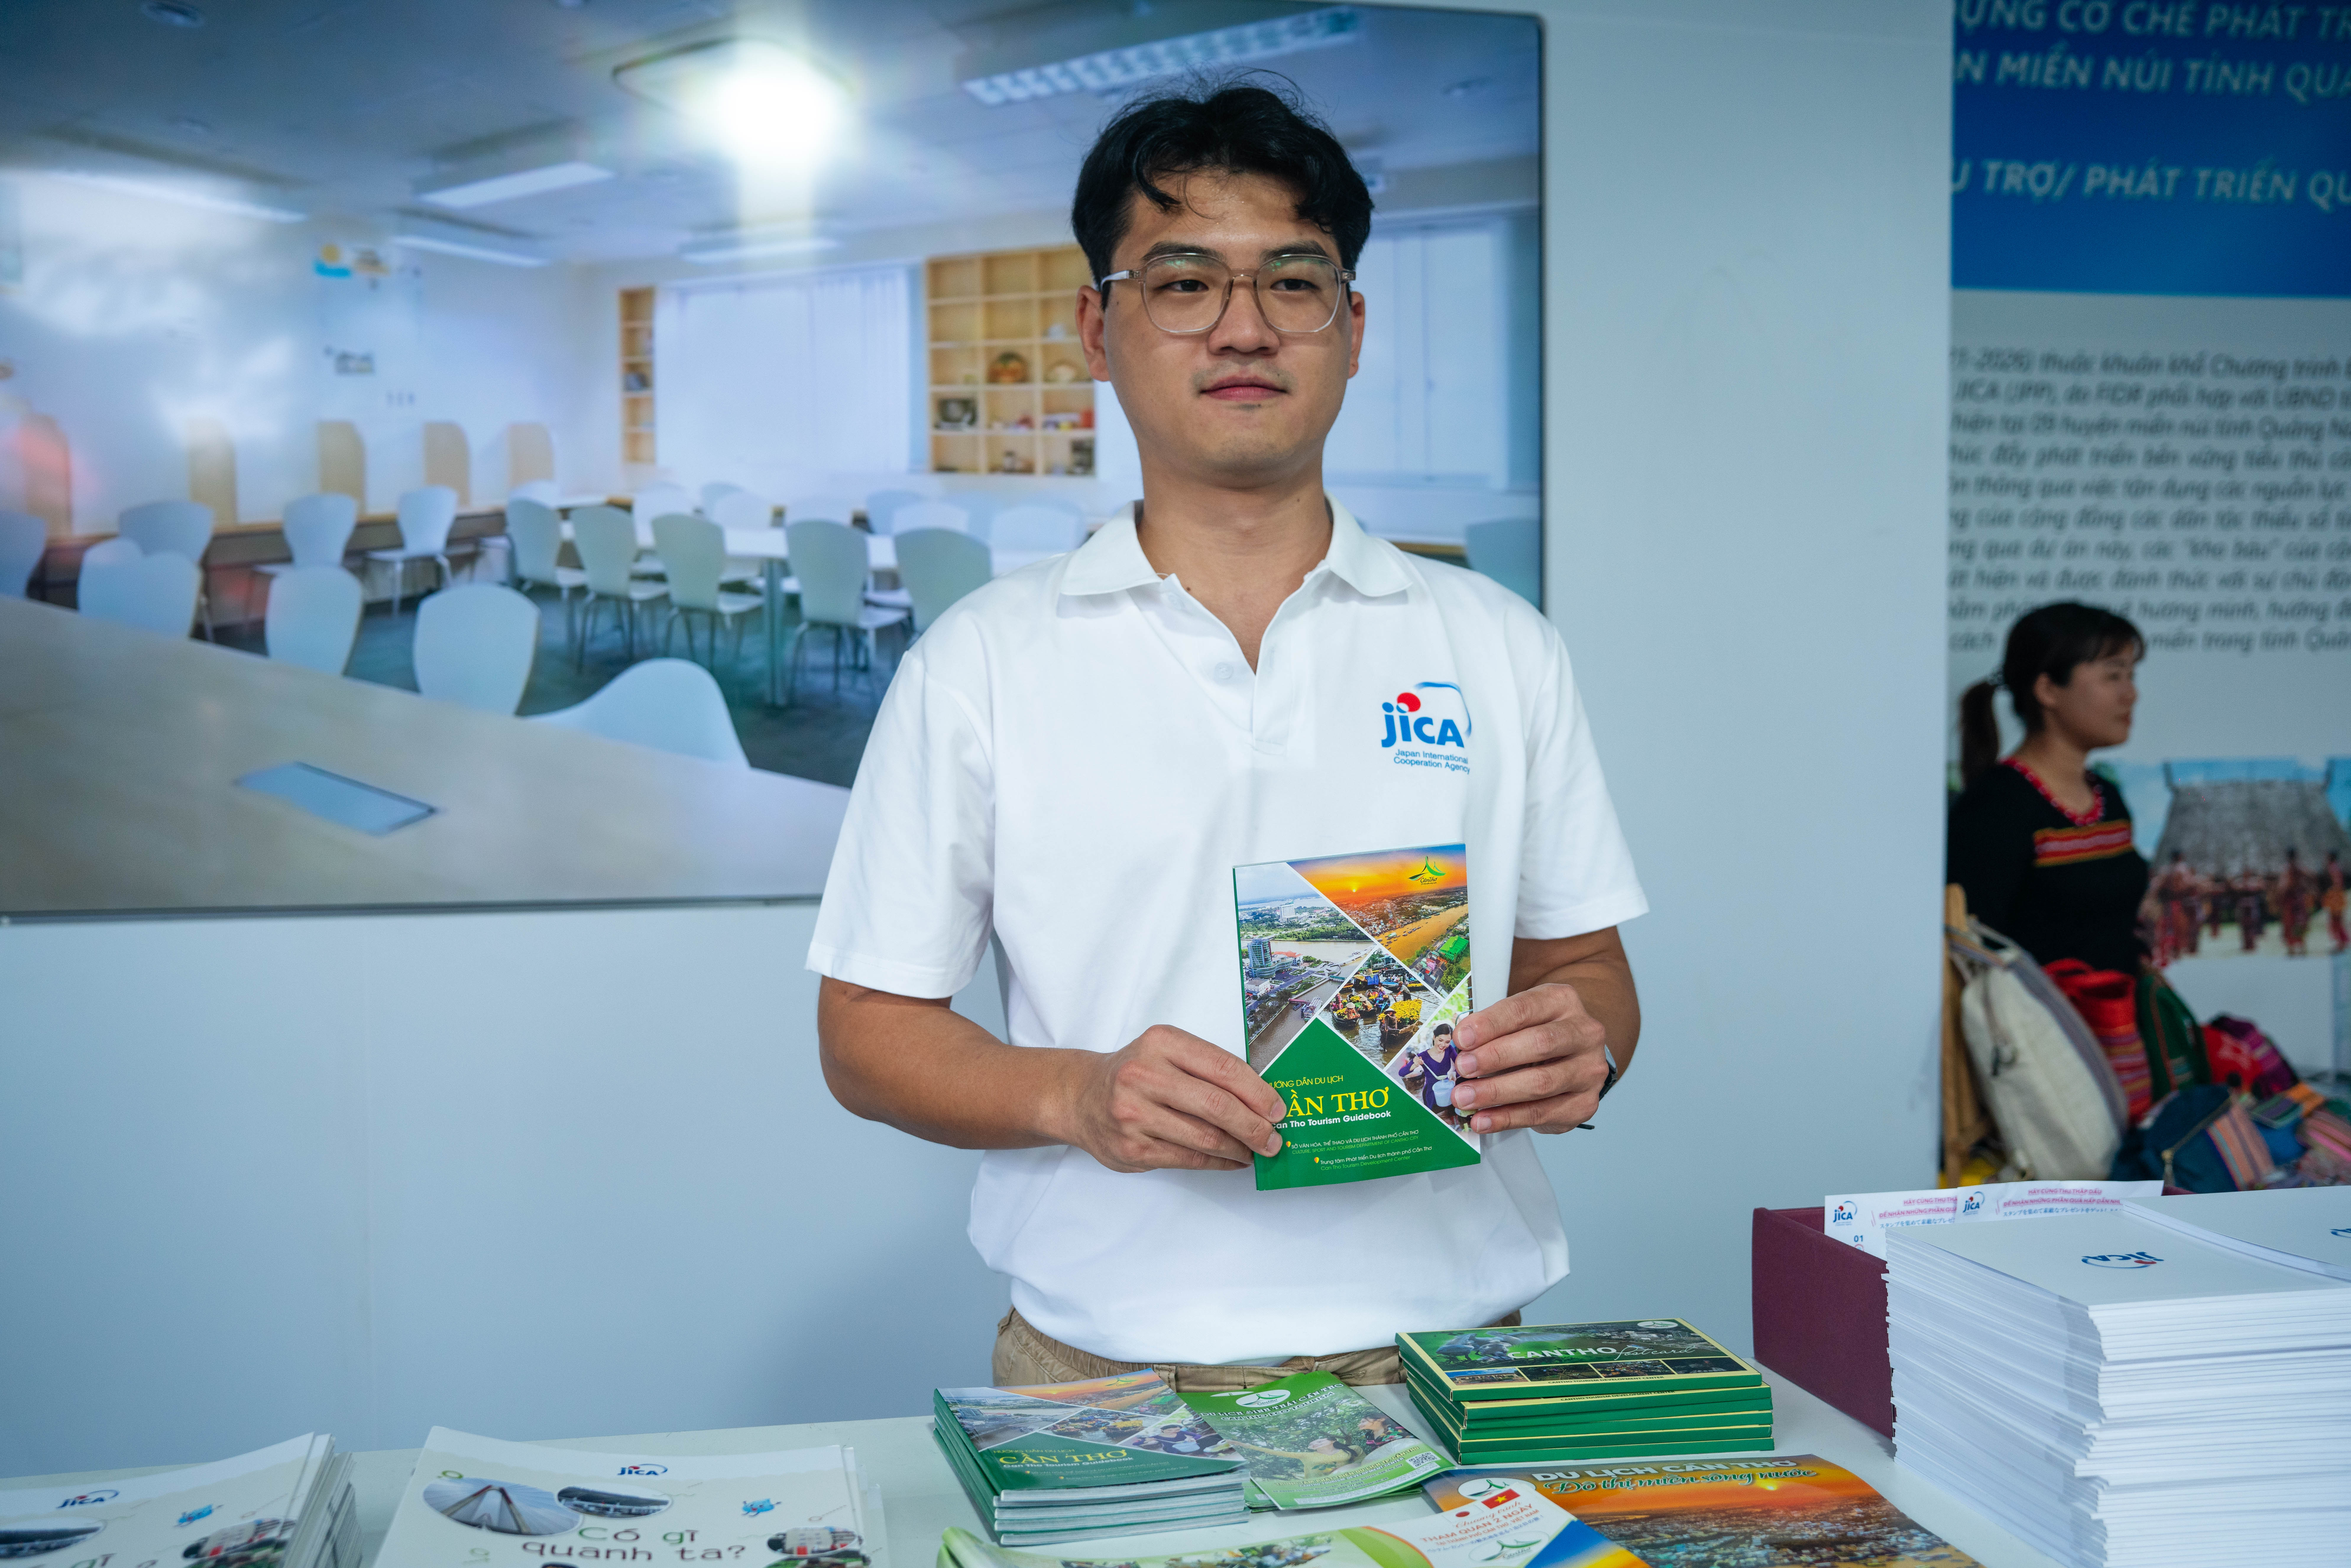 Kamiji Shota posing with Can Tho tourism promoting documents while introducing his work in the festival. Photo: Ngoc Duc / Tuoi Tre